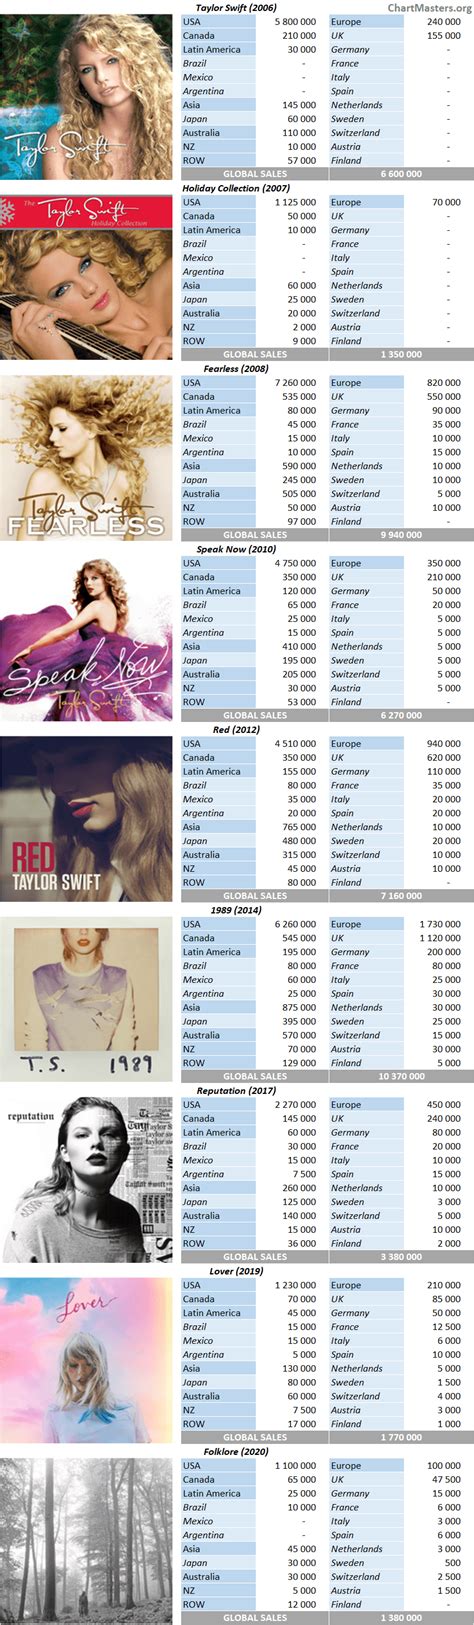 Taylor Swift Albums And Songs Sales As Of 2020 Chartmasters